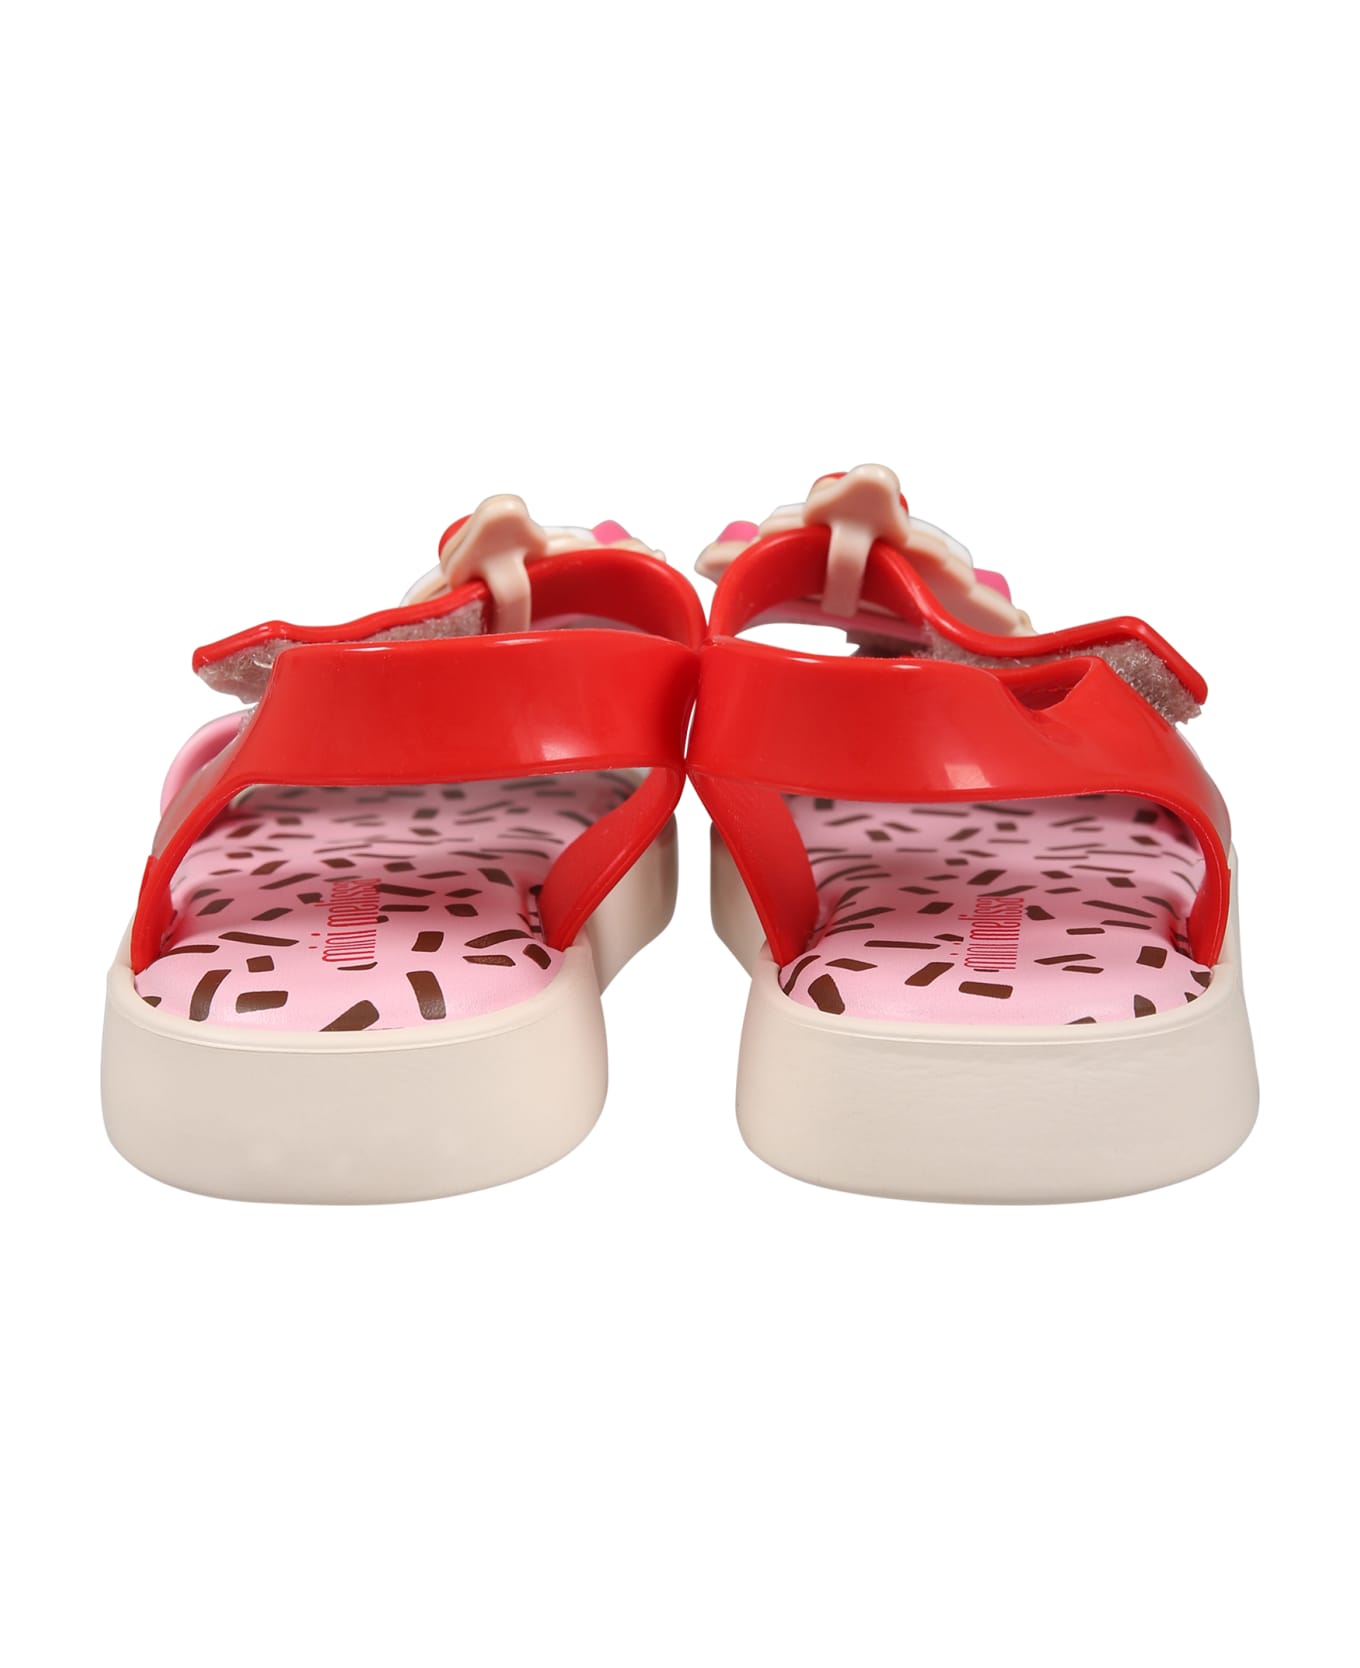 Melissa Multicolor Sandals For Girl With Cupcake And Logo - Multicolor